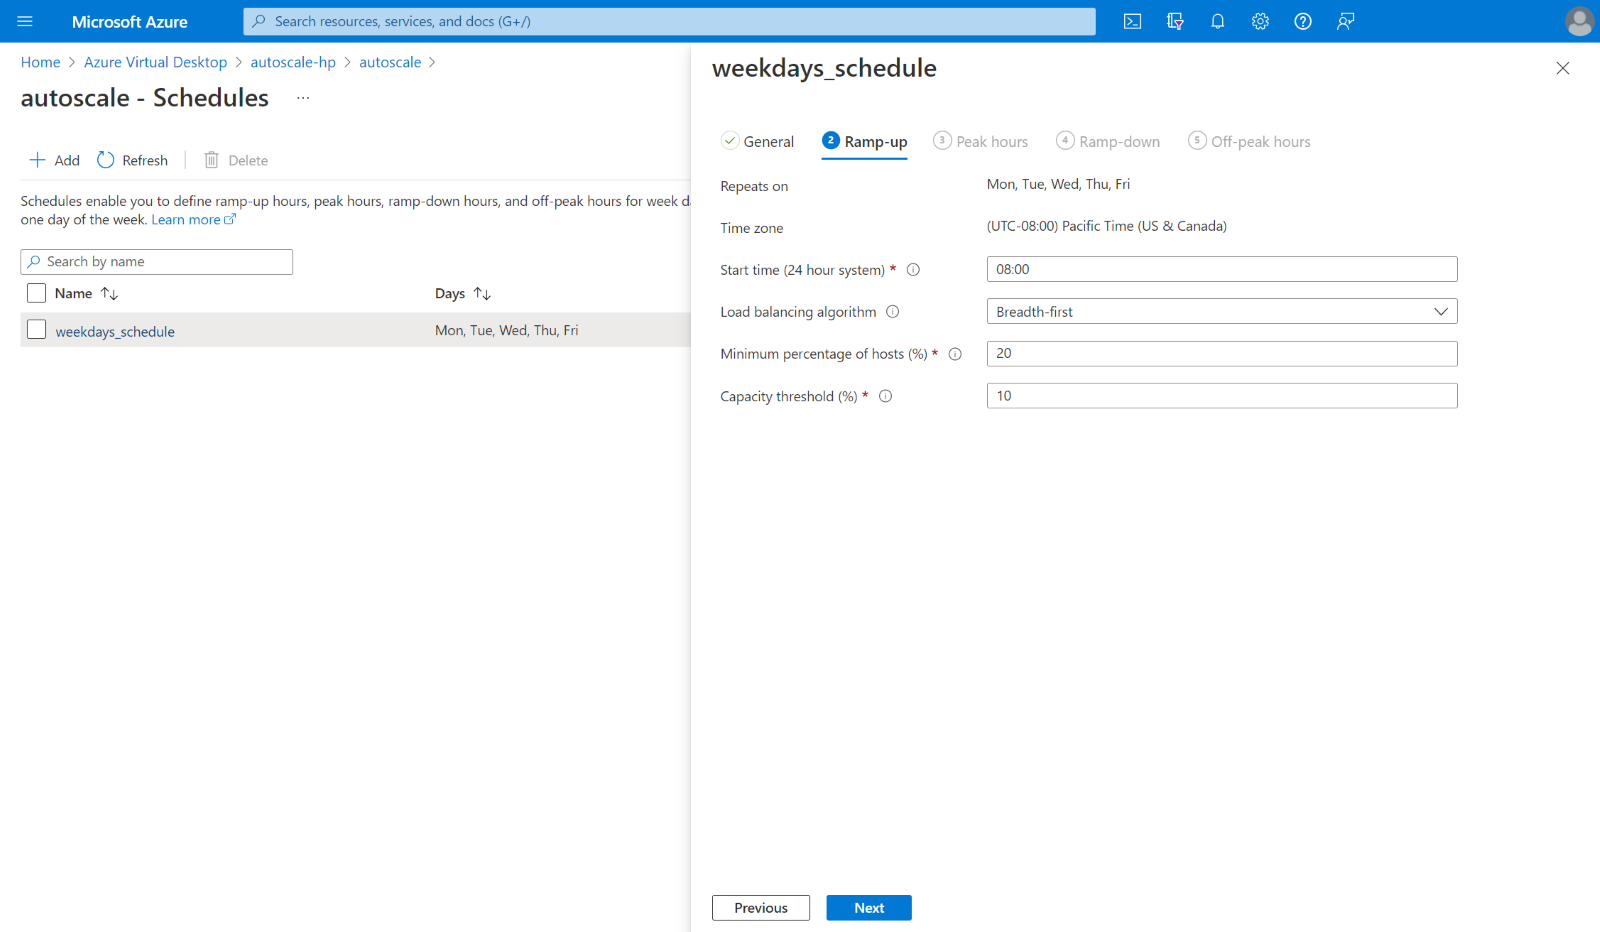 Announcing General Availability of Autoscale for Pooled Host Pools on Azure Virtual Desktop